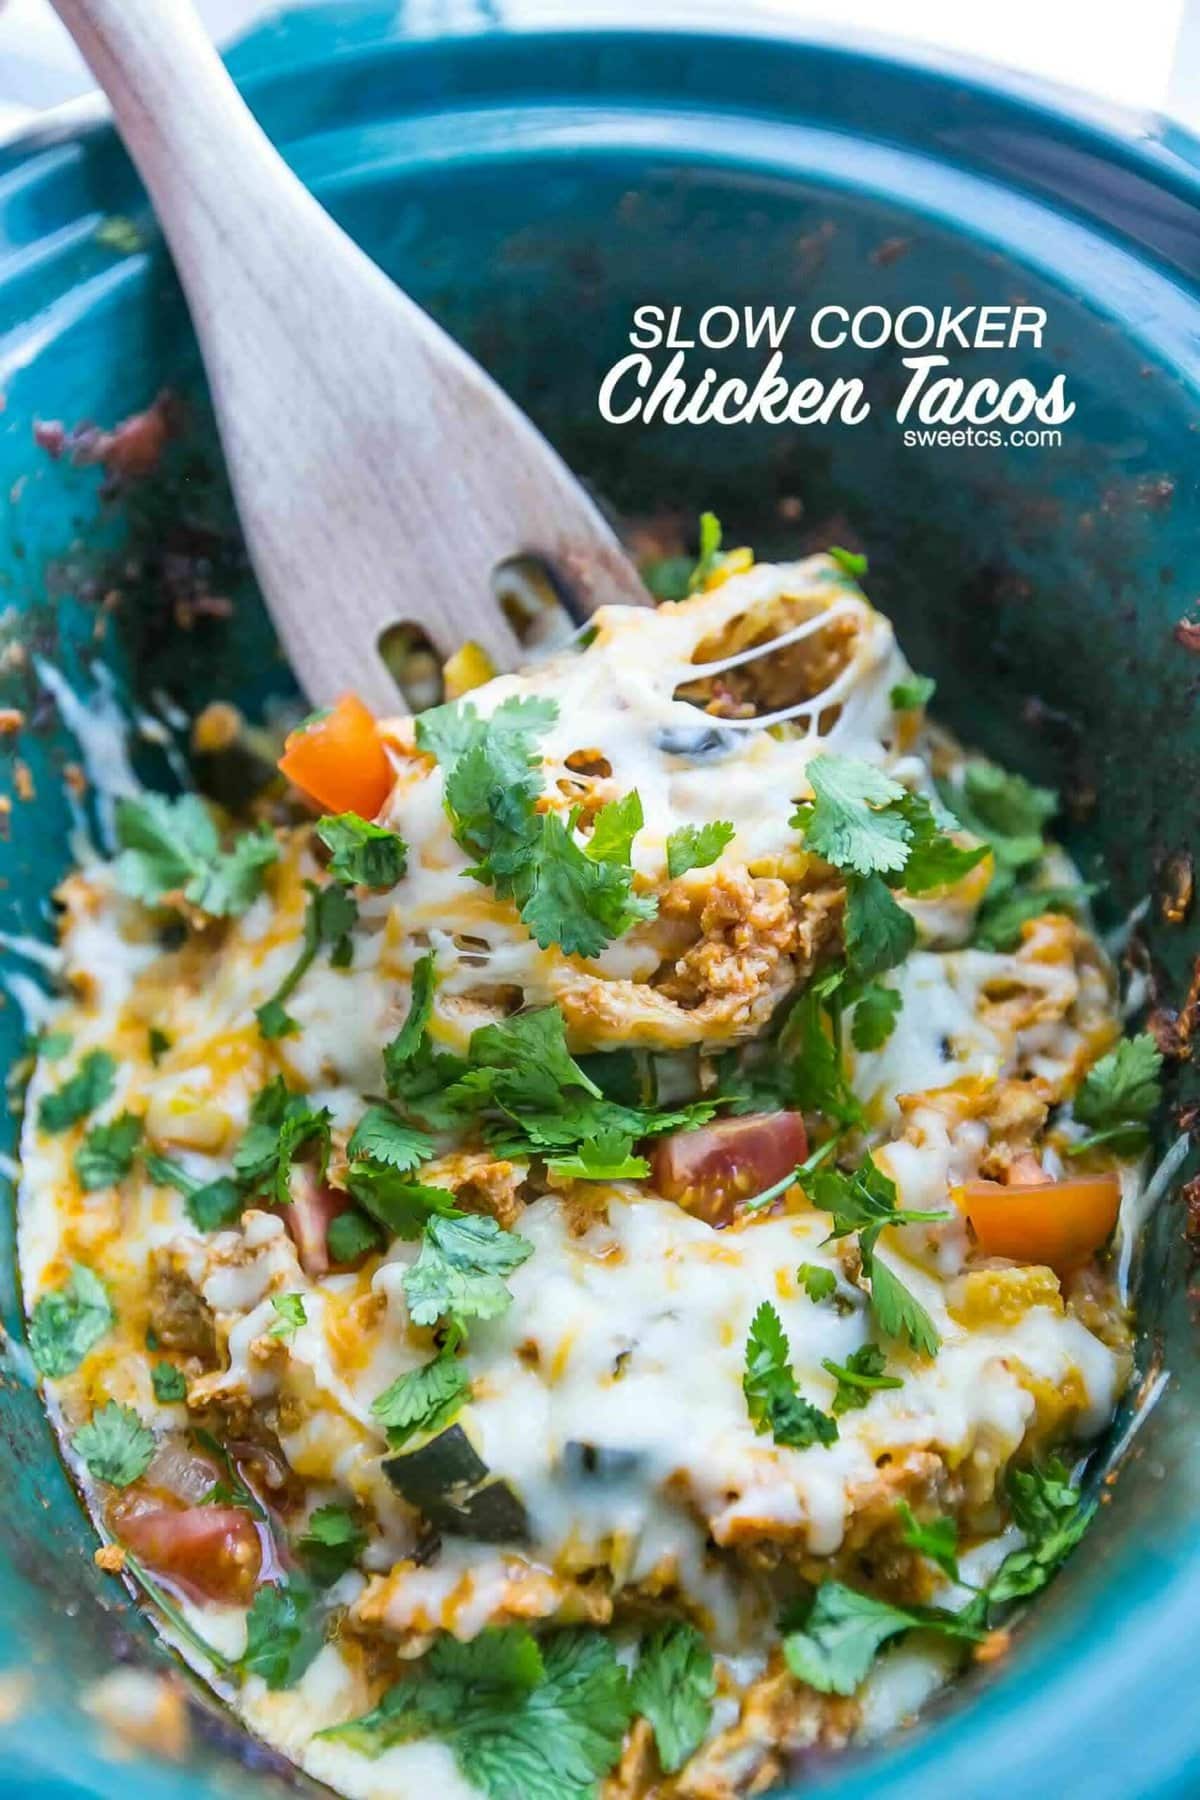 Slow cooker chicken tacos in a bowl.